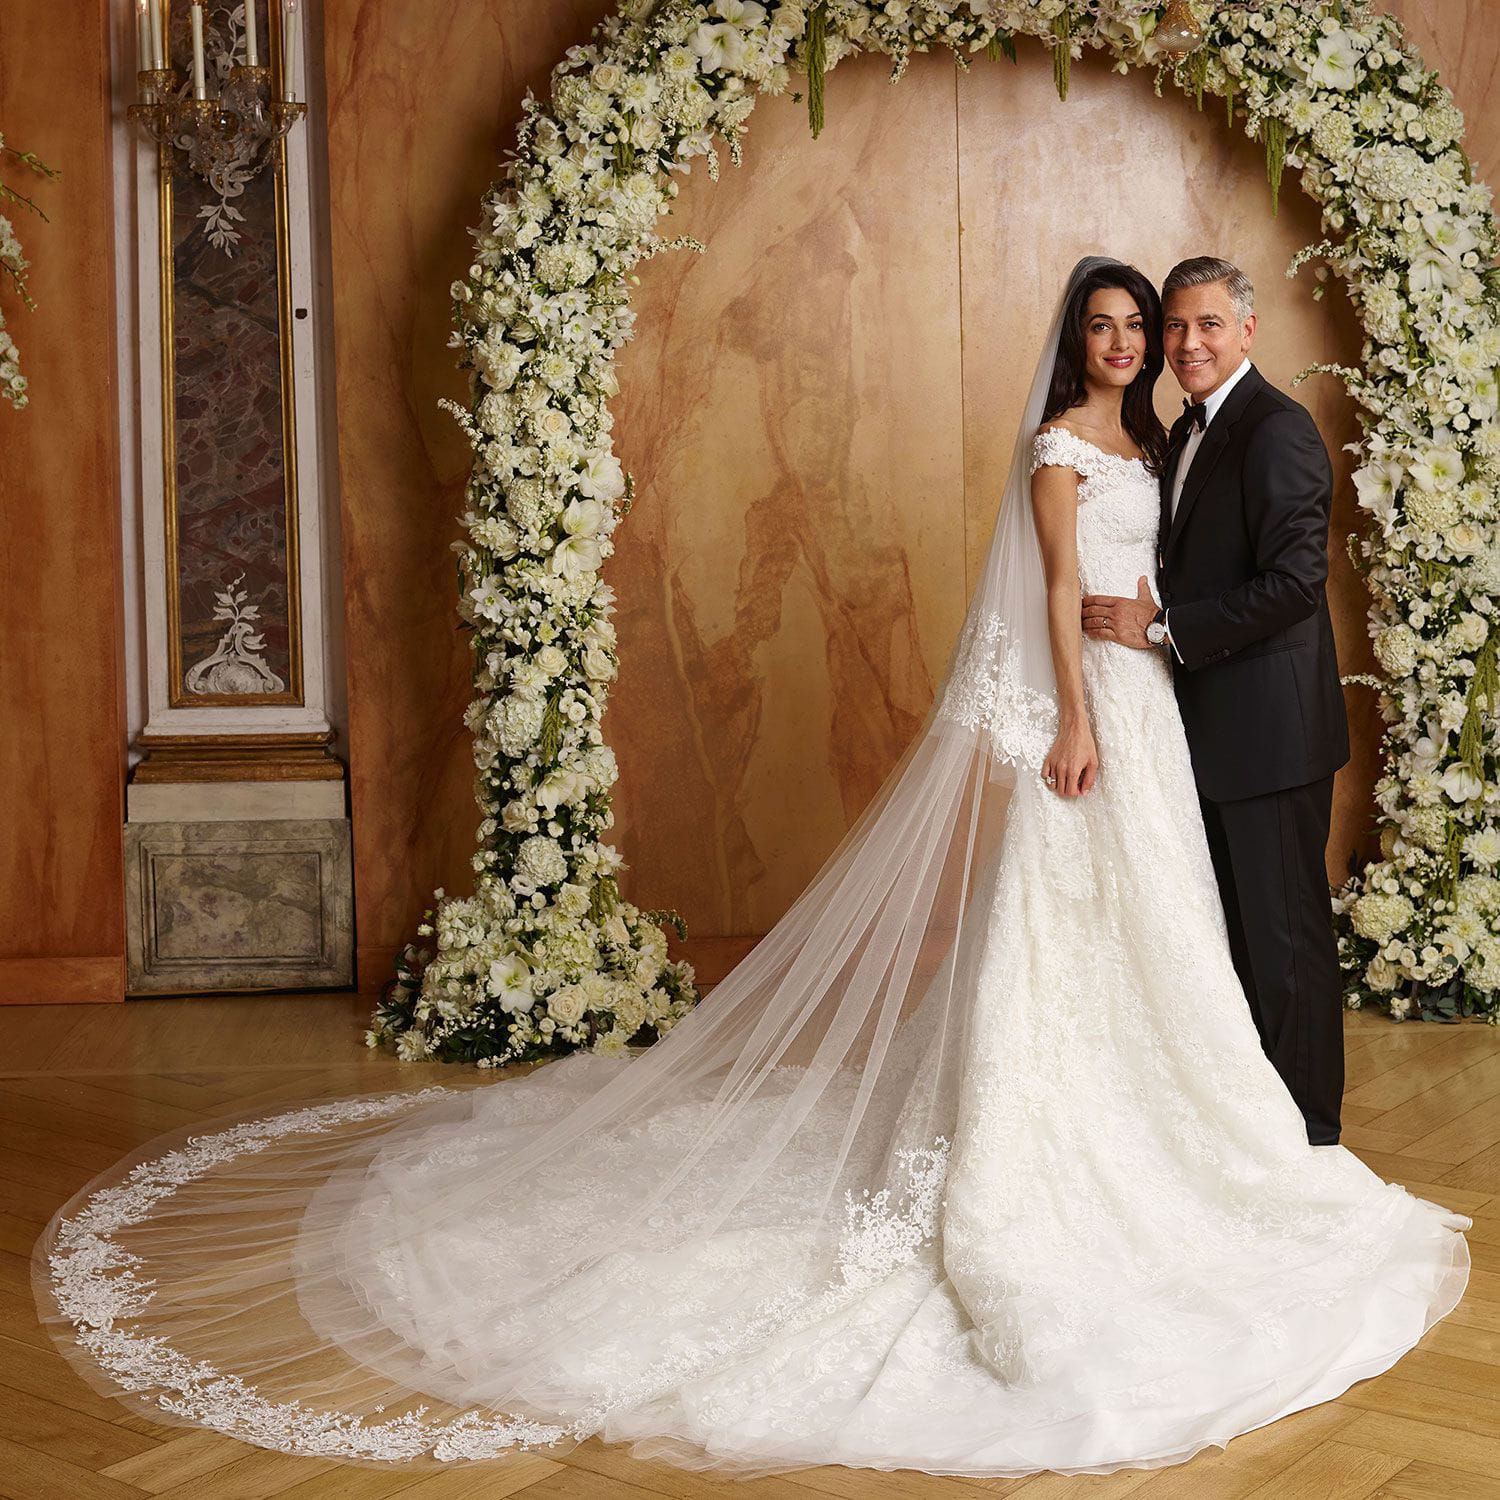 George Clooney and Amal Alamuddin - EXPENSIVE WEDDING